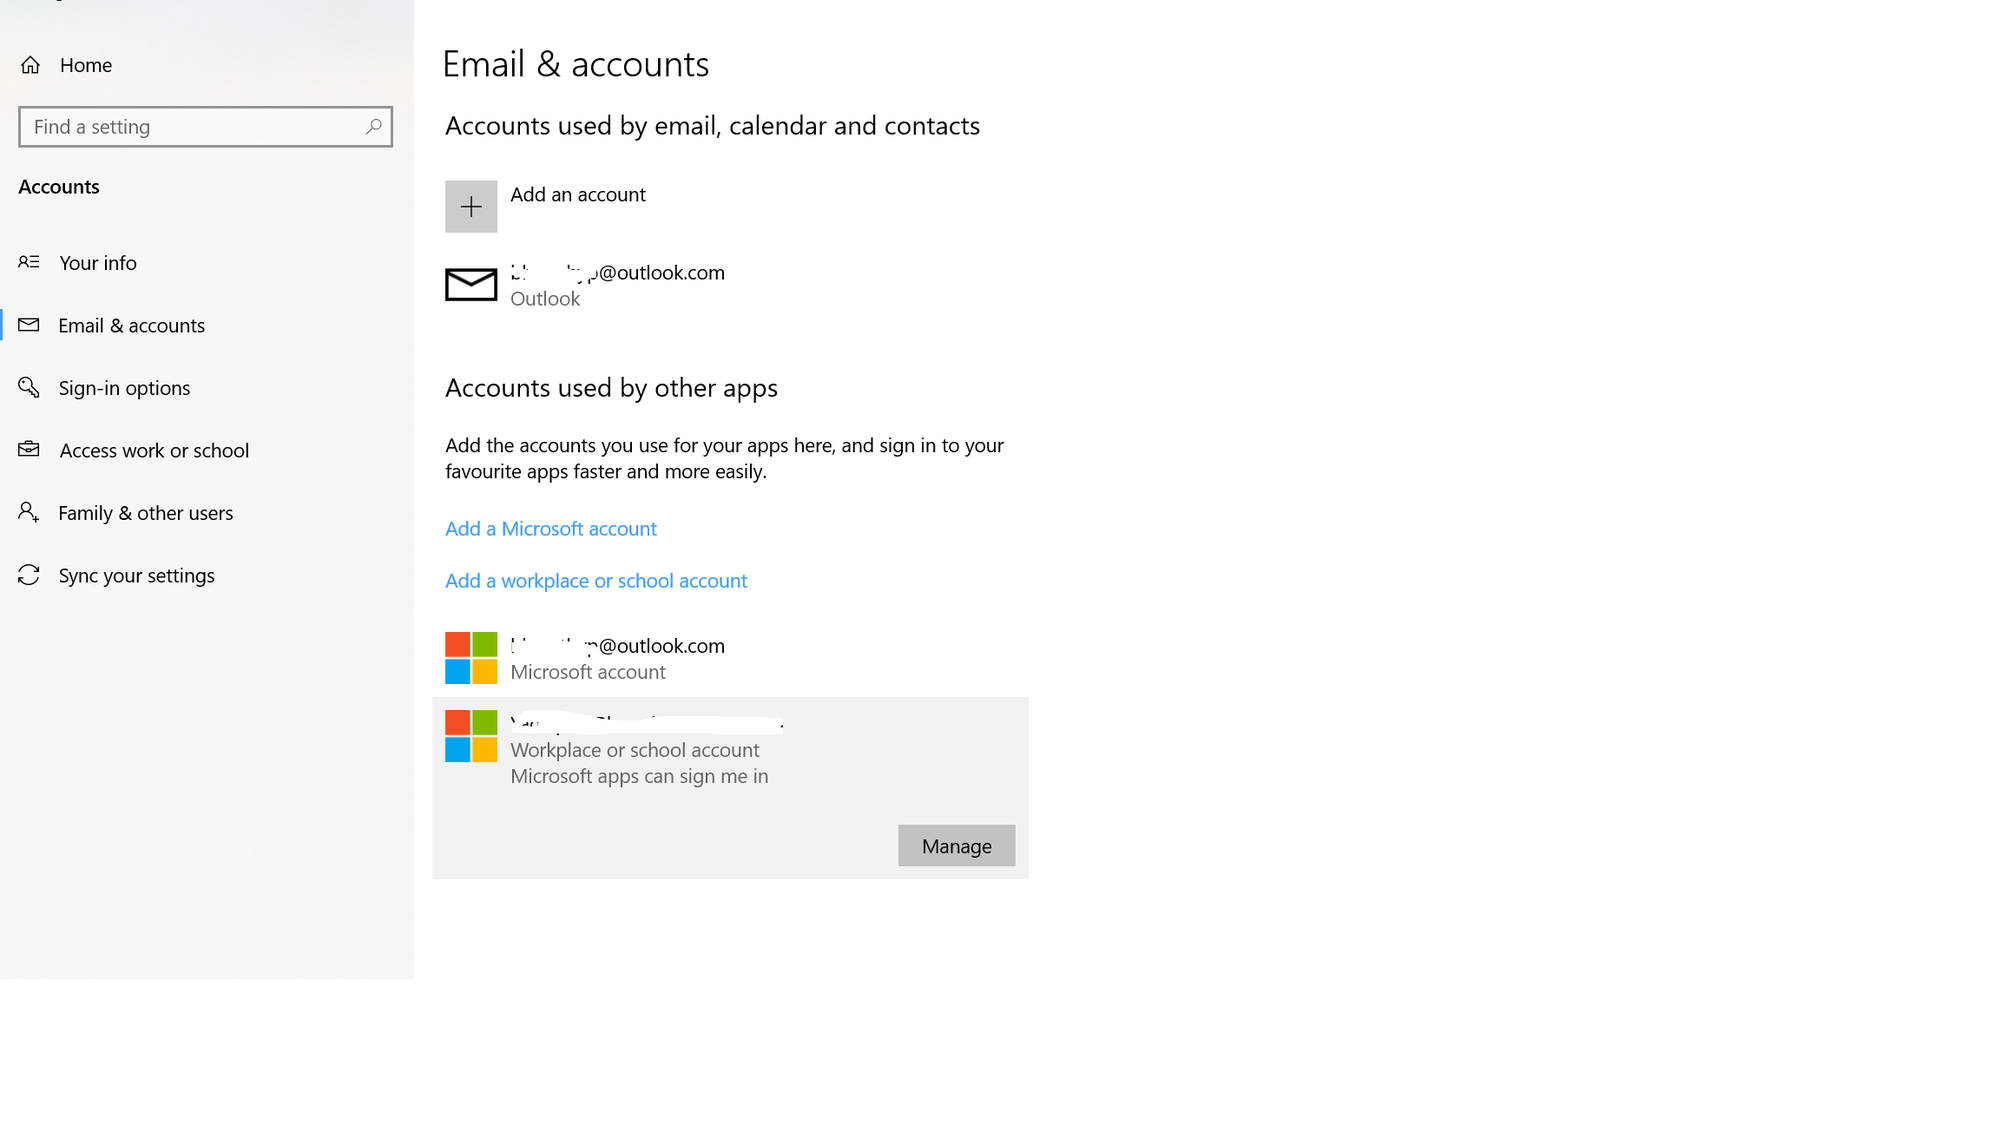 Can't seem to remove work or school account from my "Email & Accounts" bb862fd1-d5b0-4c6c-a2ff-d41d27628f5c?upload=true.png